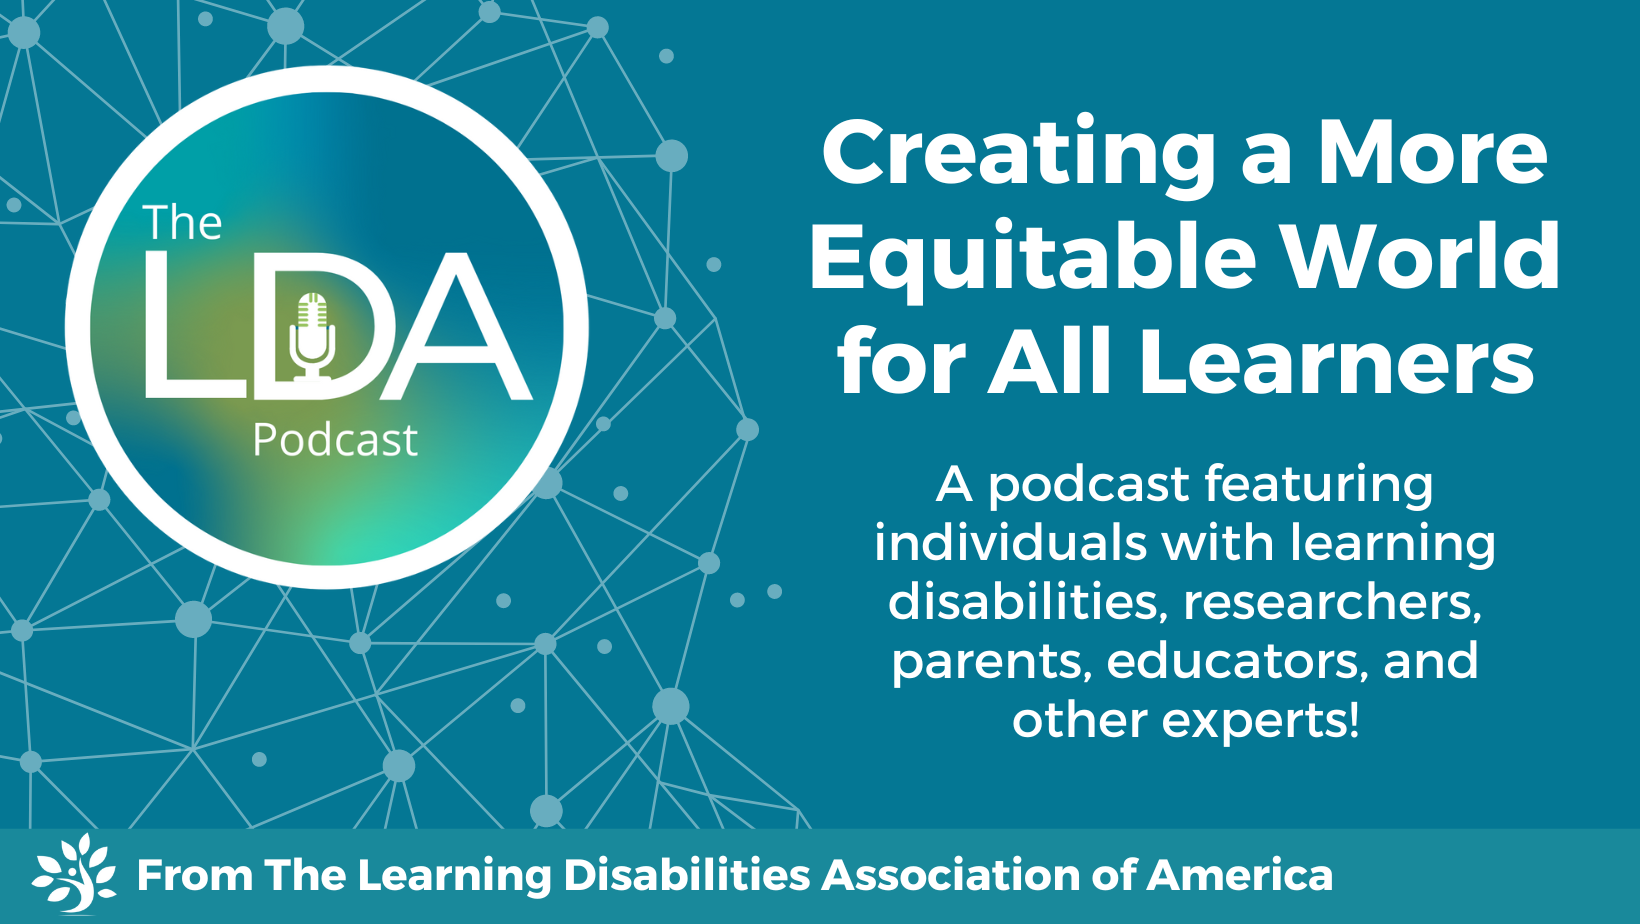 The LDA Podcast: Creating a More Equitable World for All Learners. A podcast featuring individuals with learning disabilities, researchers, parents, educators, and other experts! From The Learning Disabilities Association of America